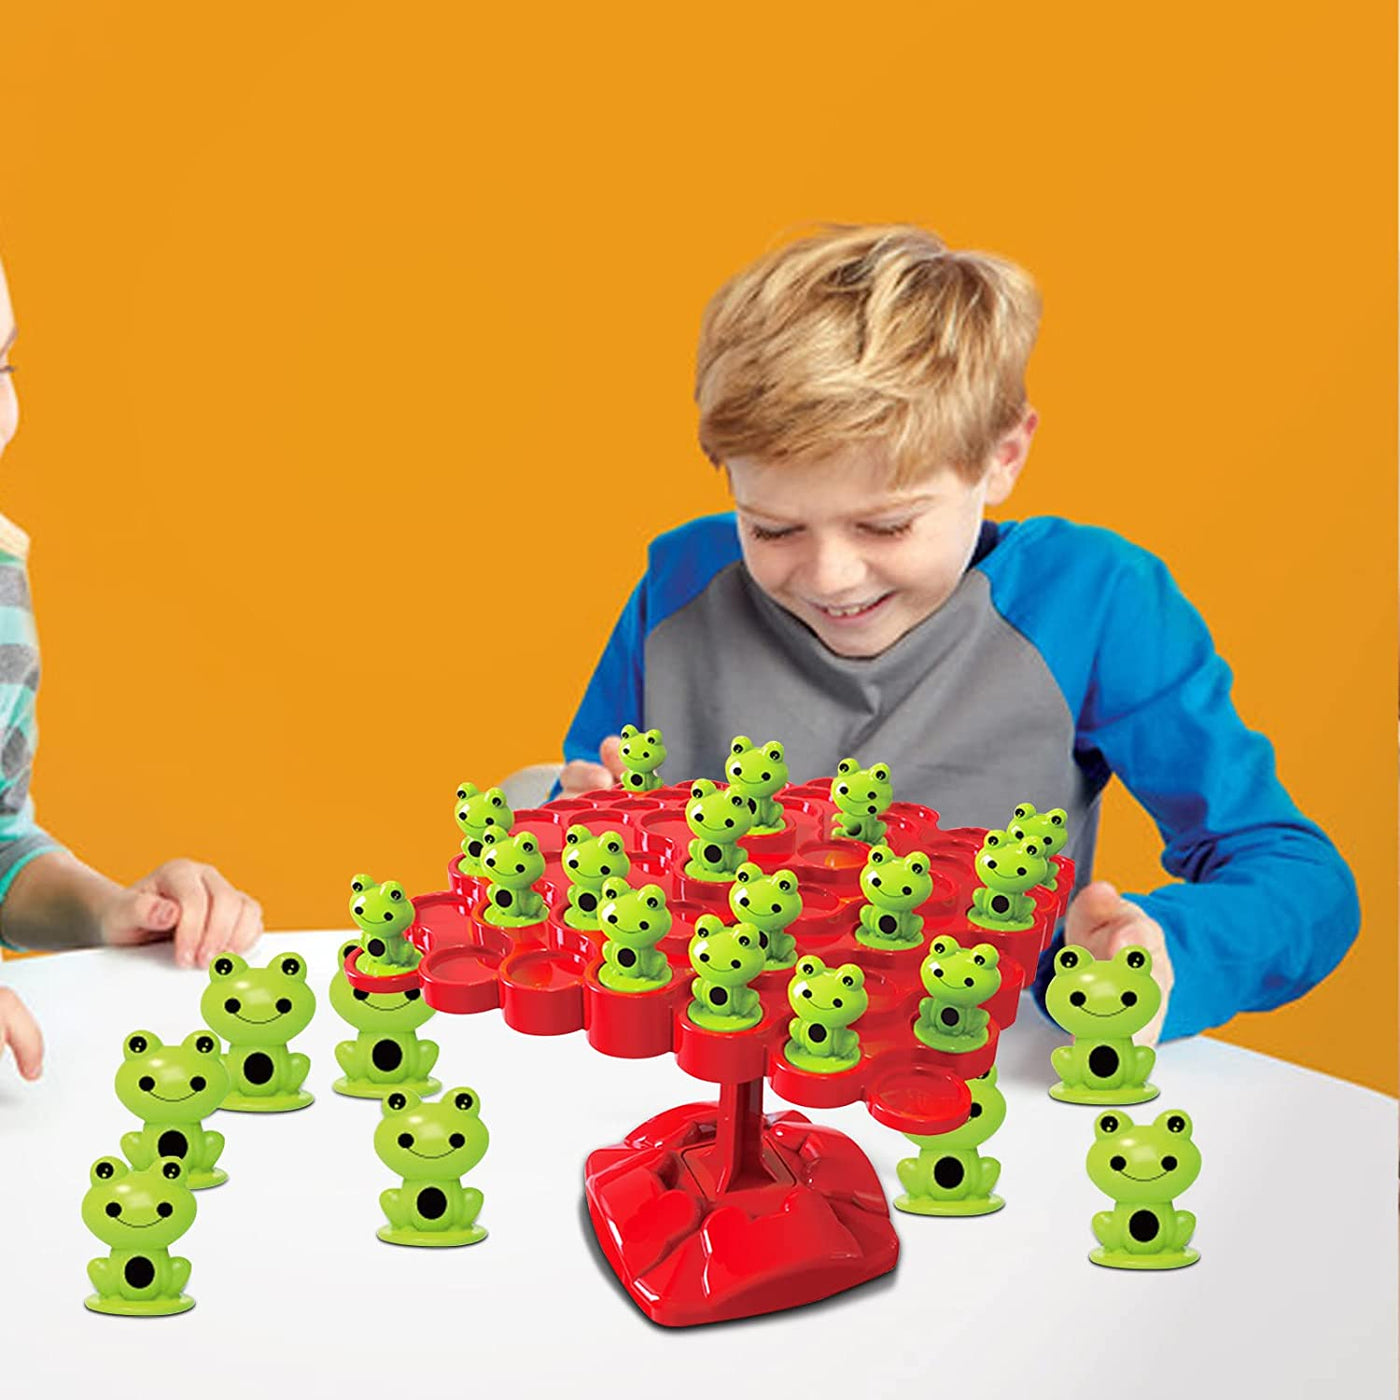 Balance Board Game for Kids Frog Toy